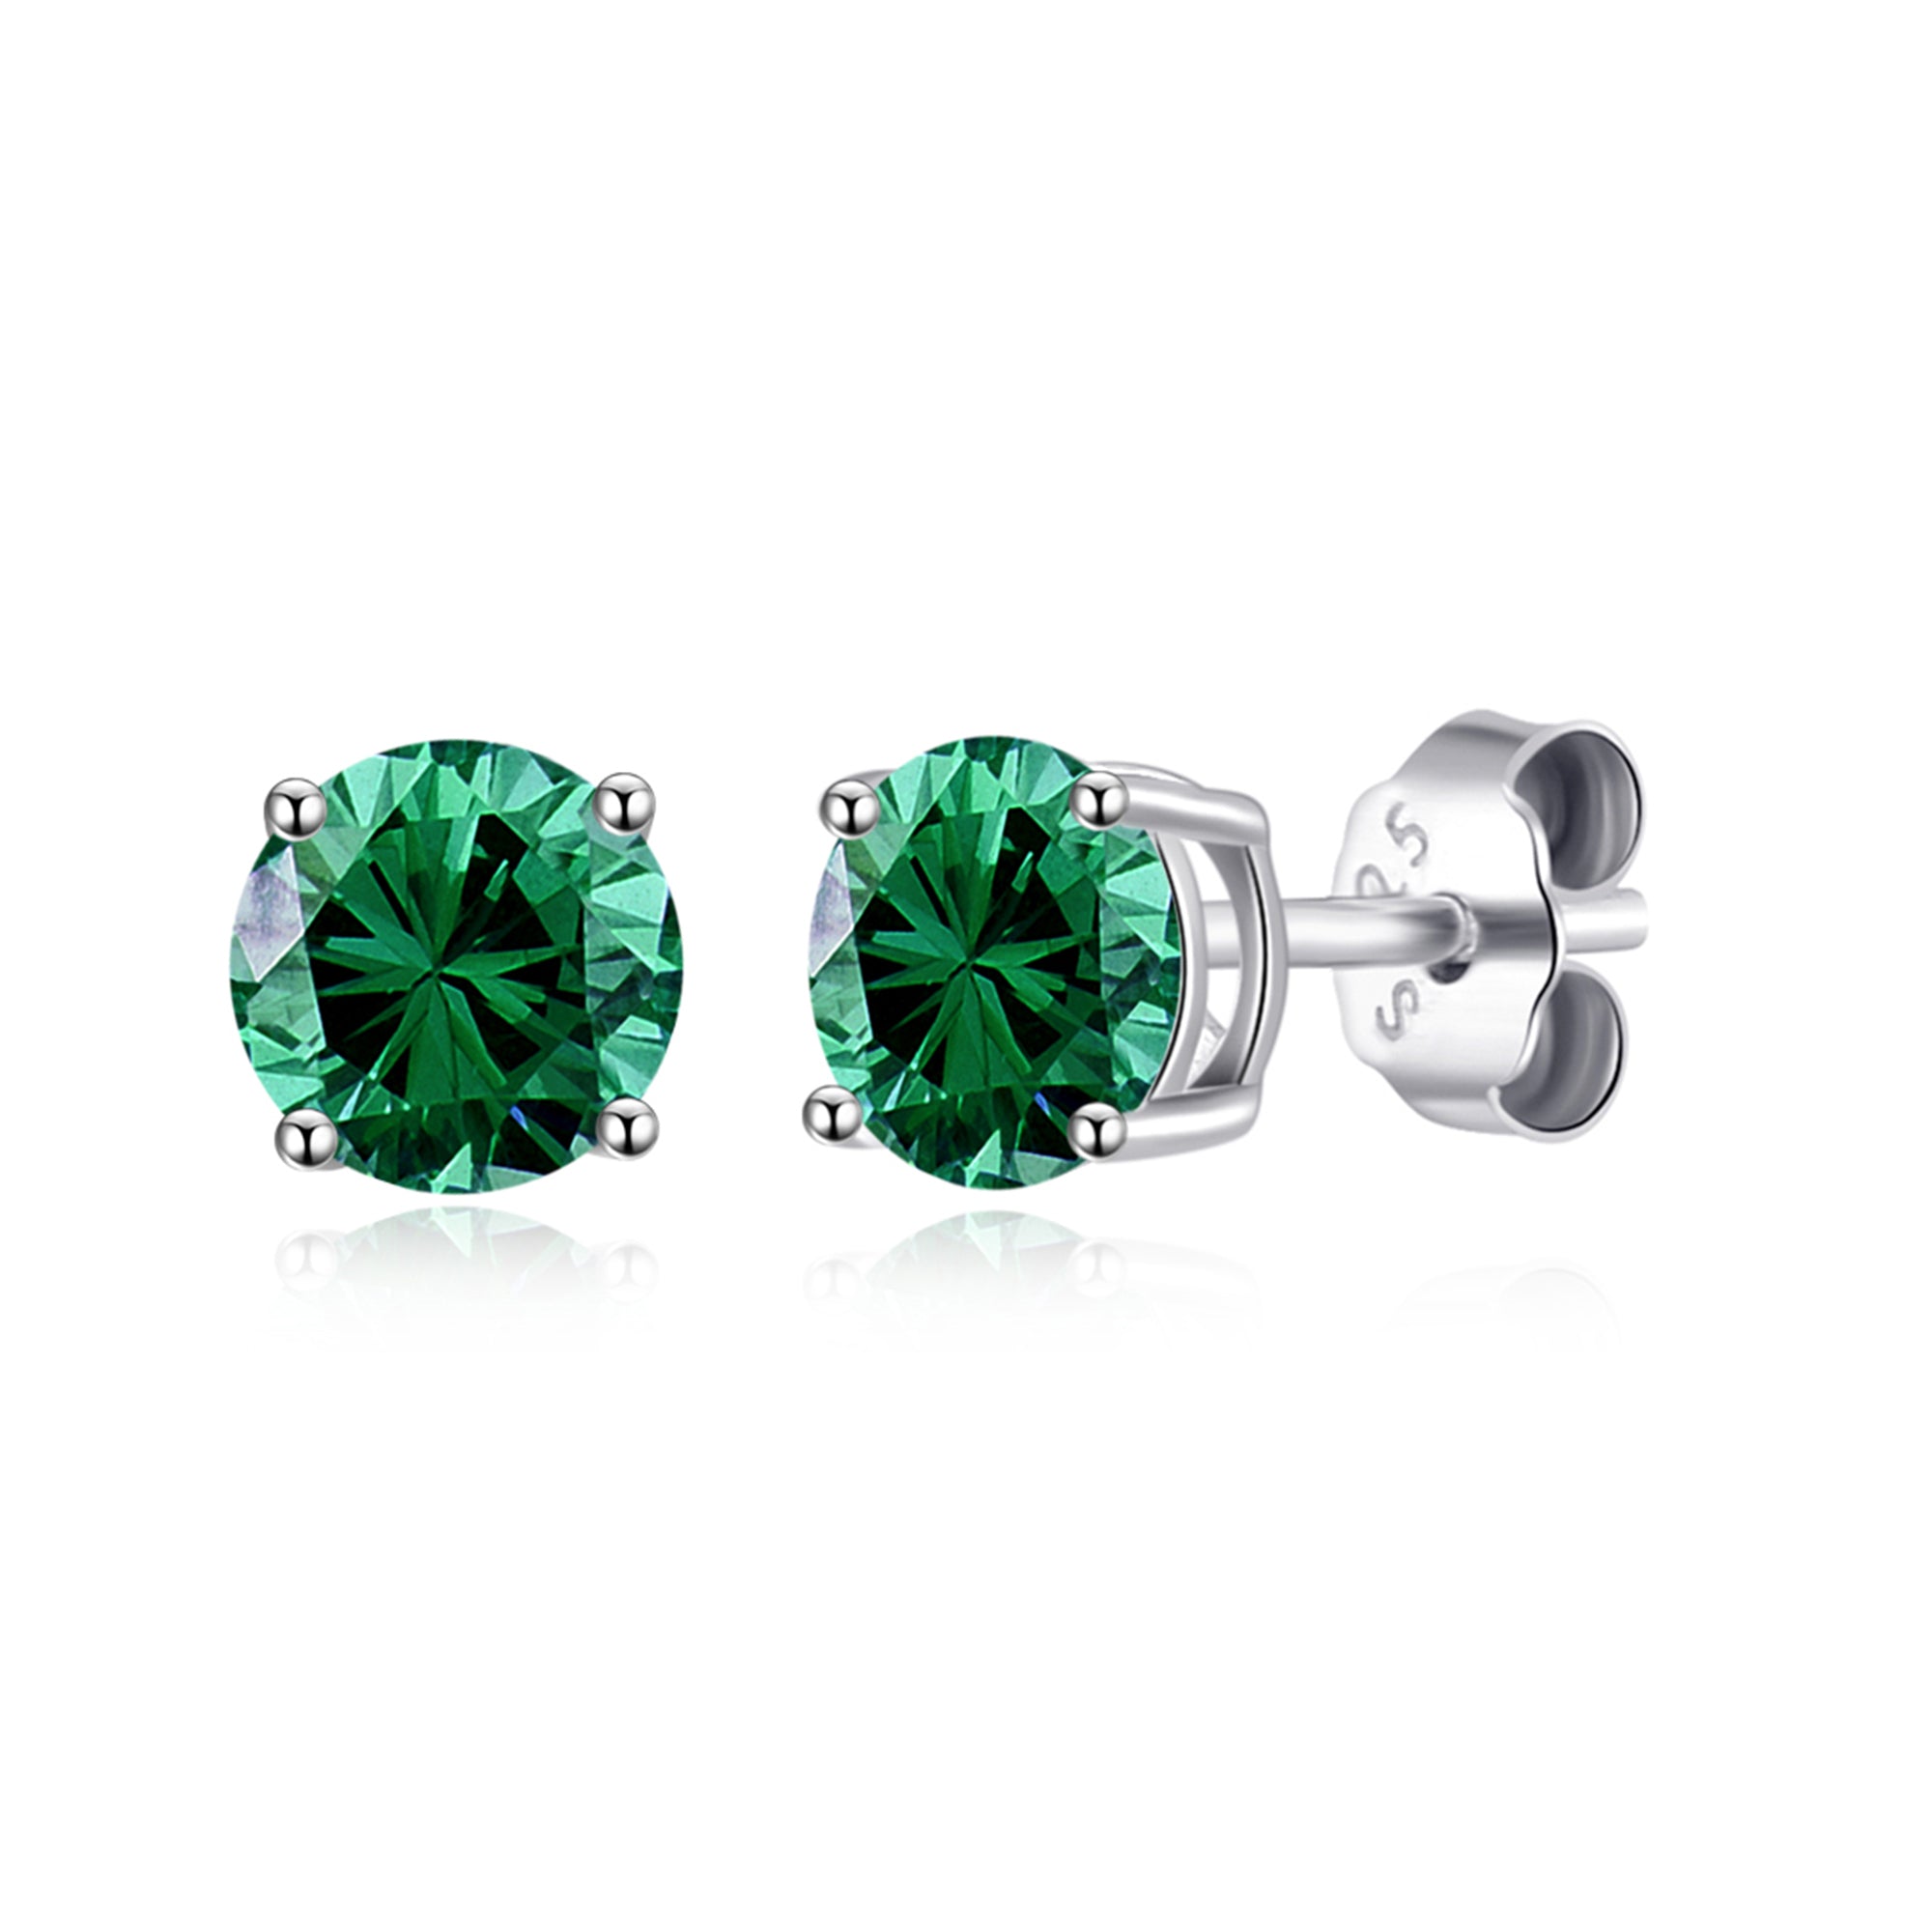 Sterling Silver May (Emerald) Birthstone Earrings Created with Zircondia® Crystals by Philip Jones Jewellery